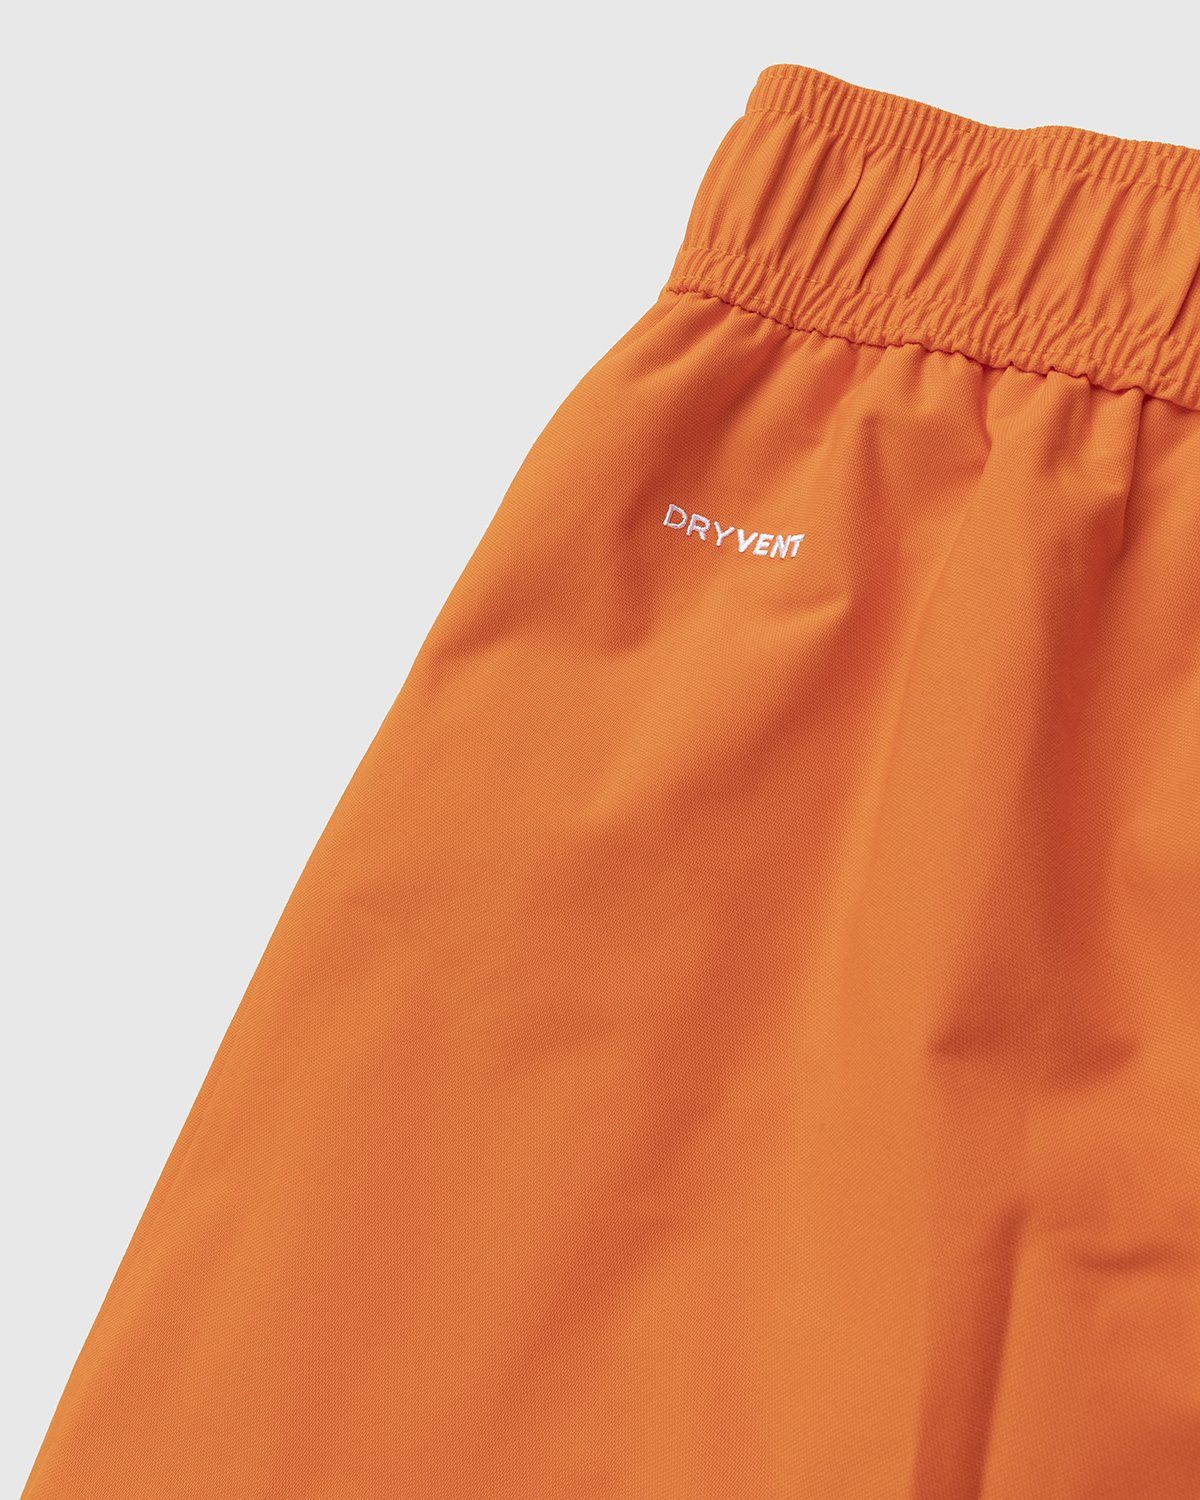 The North Face – Trans Antarctica Expedition Pant Red Orange